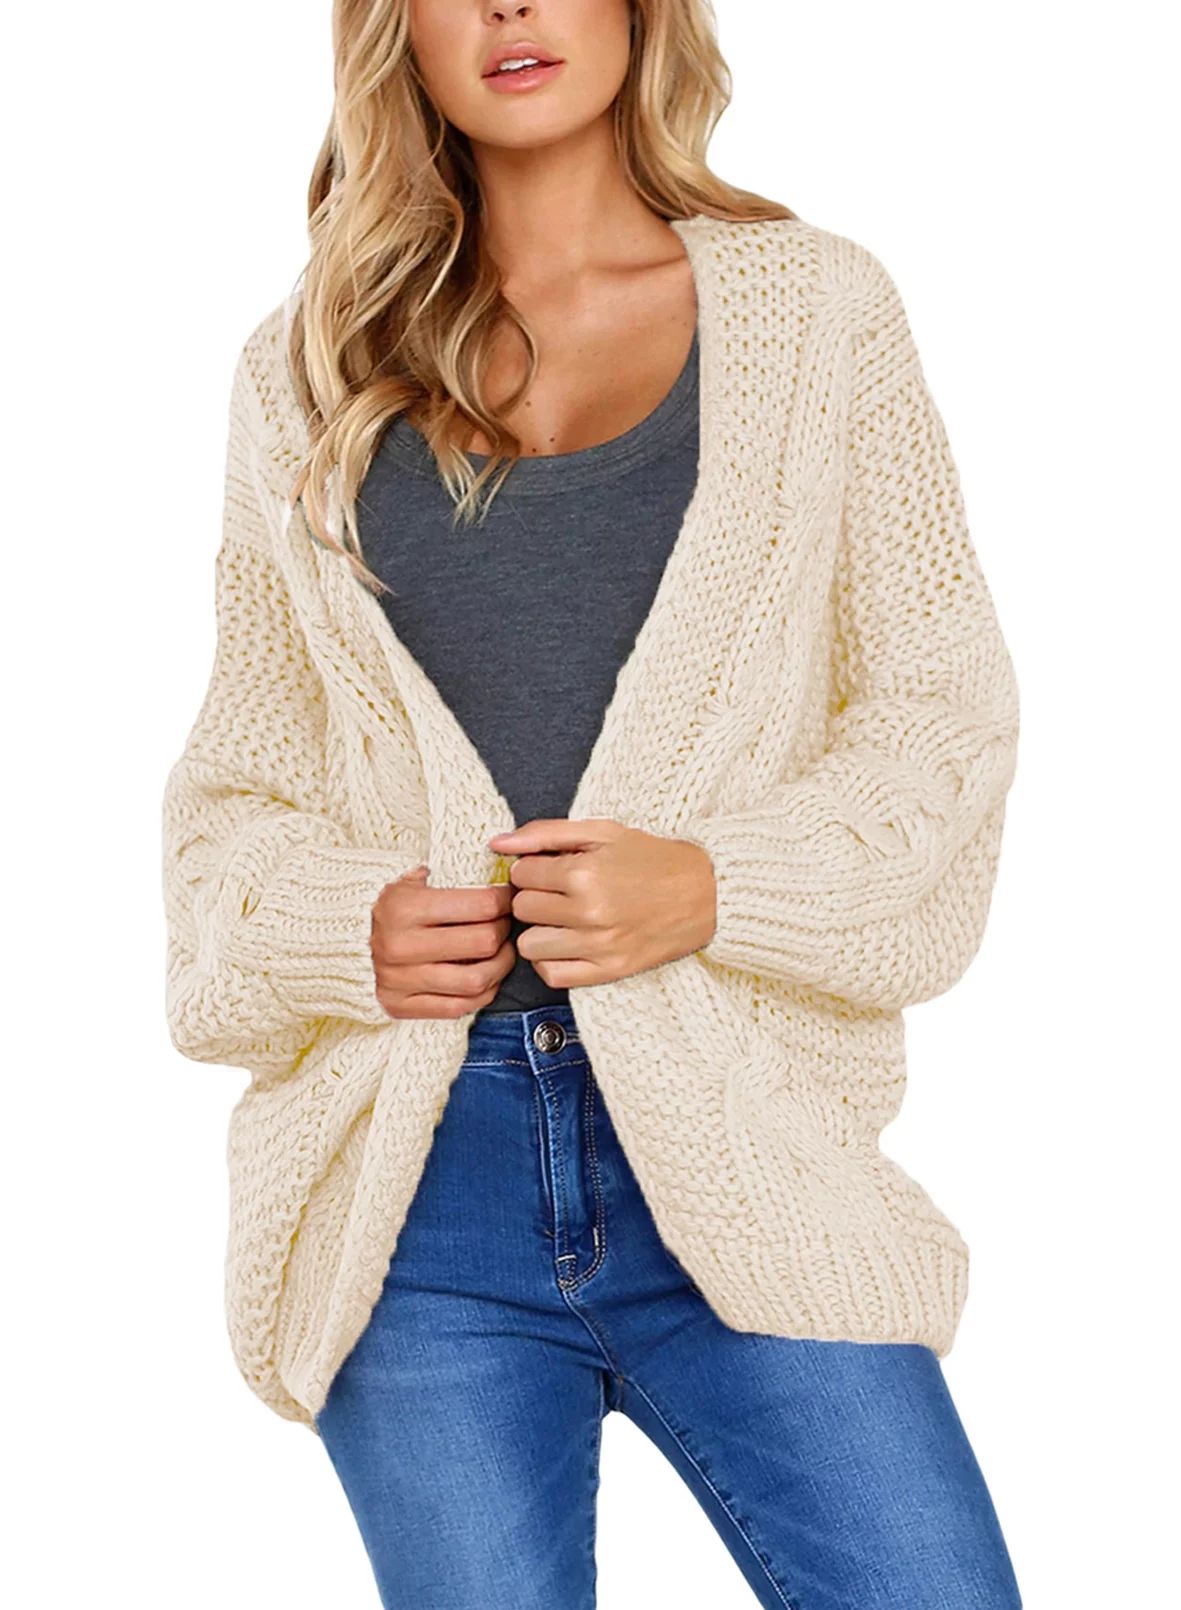 Dokotoo Womens White Chunky Knitted Cardigan Open Front Winter Sweater Coat Size Medium US 8-10 -... | Walmart (US)